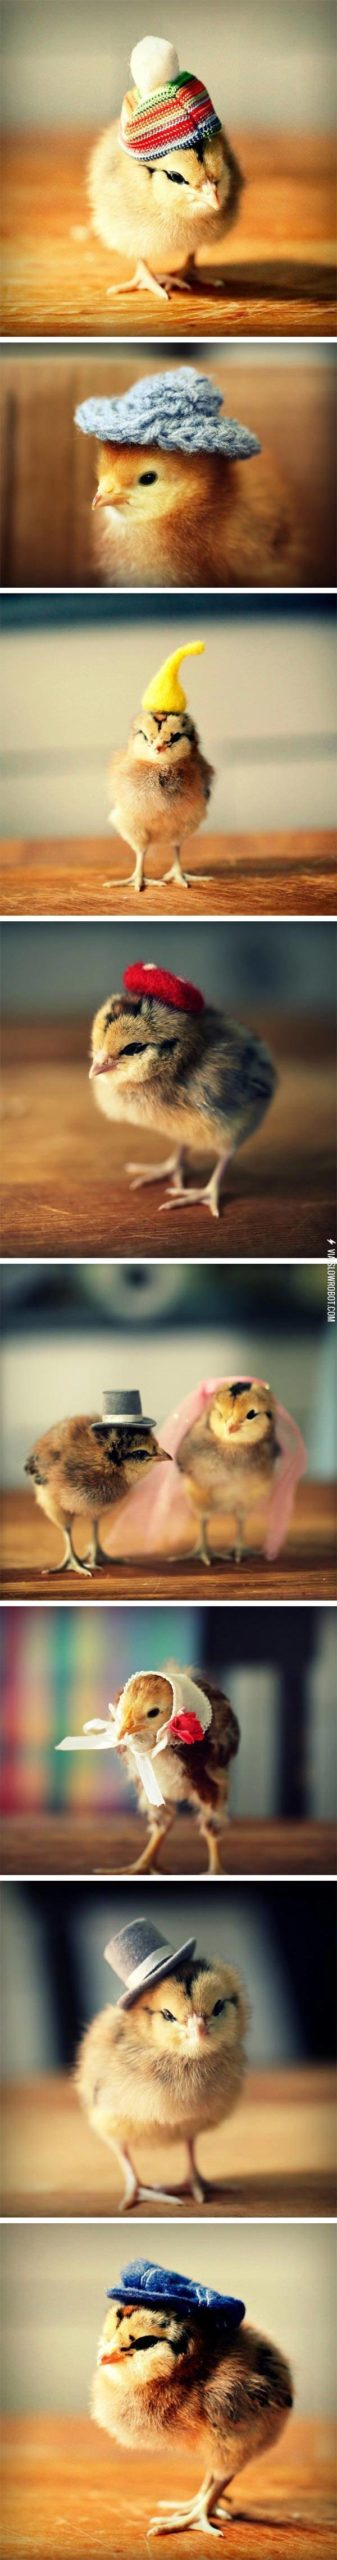 Chicks+in+hats.